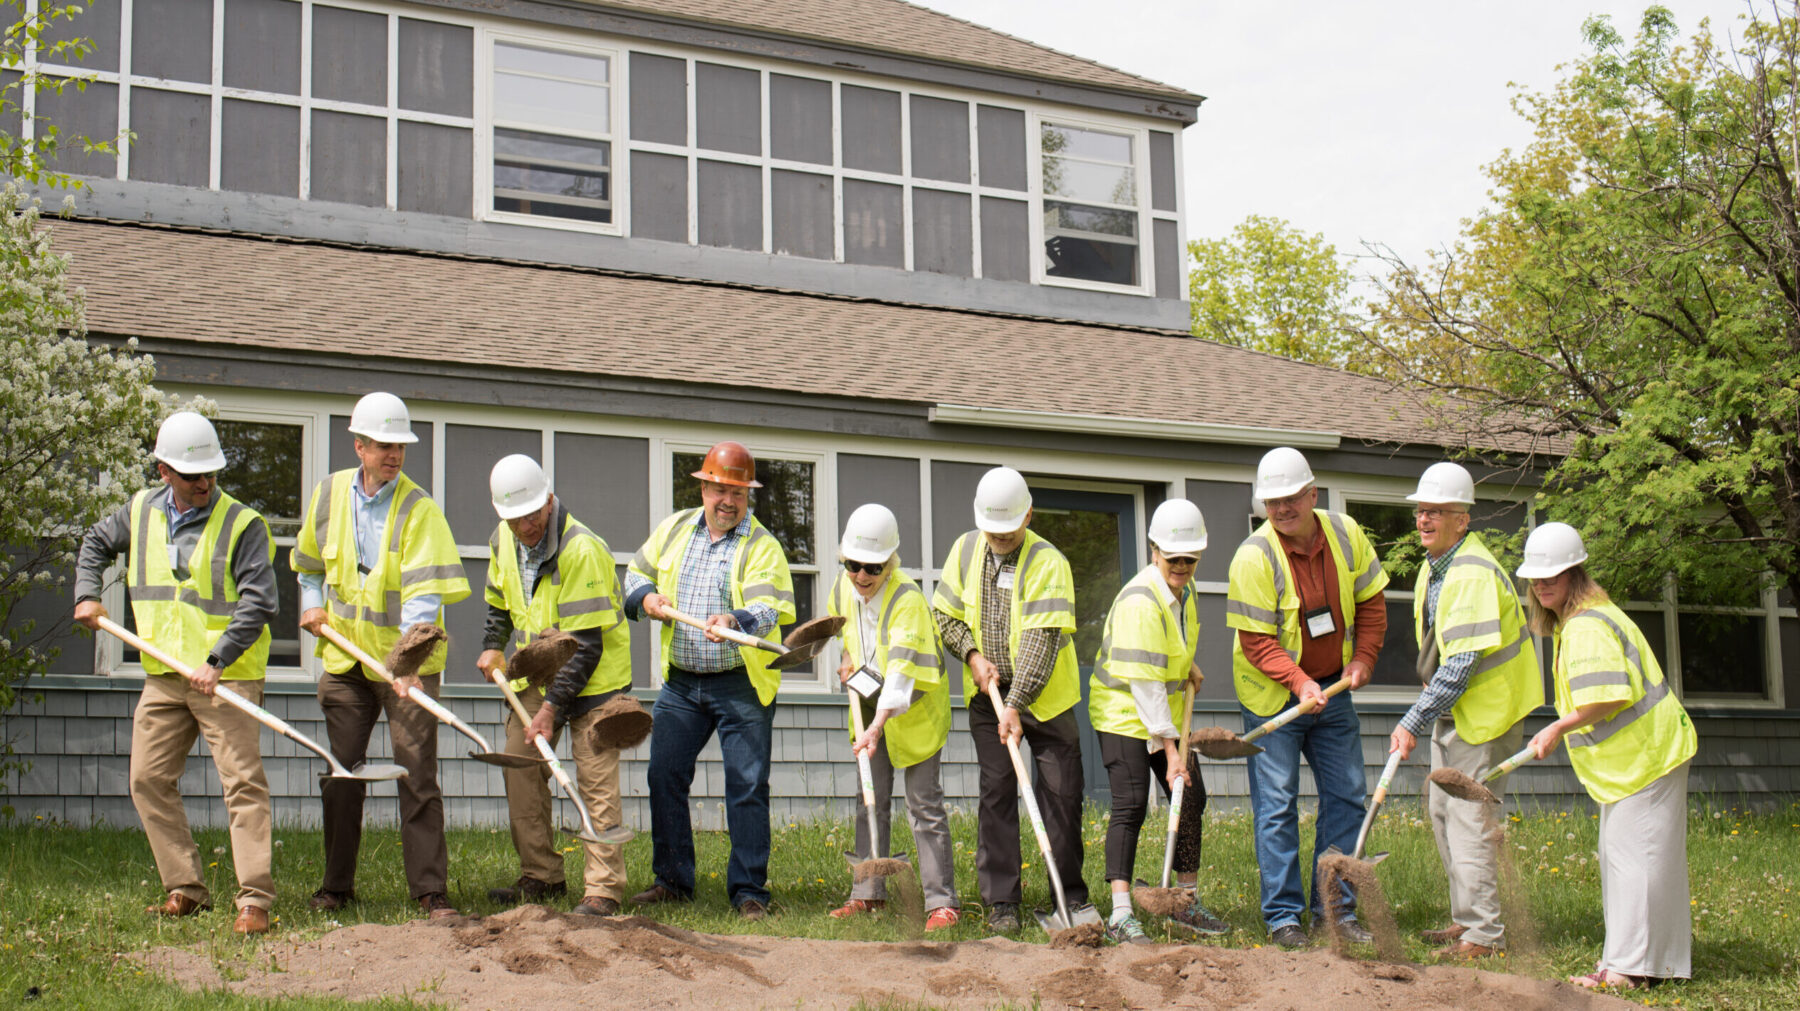 Group Wearing Construction Outfits Holding Shovels